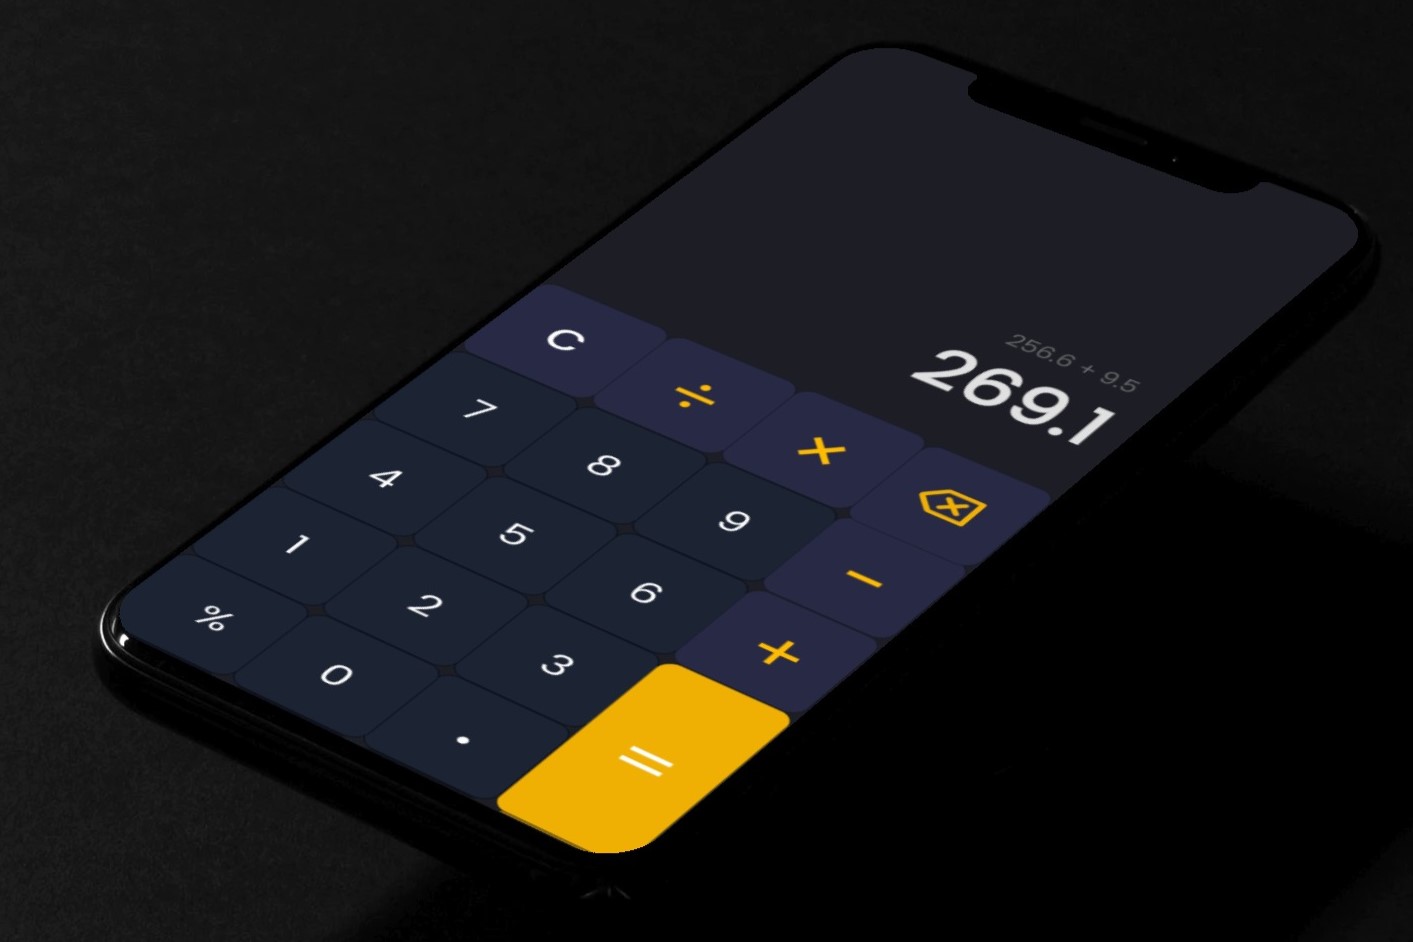 Locating Calculator: Finding The Calculator App On IPhone 14